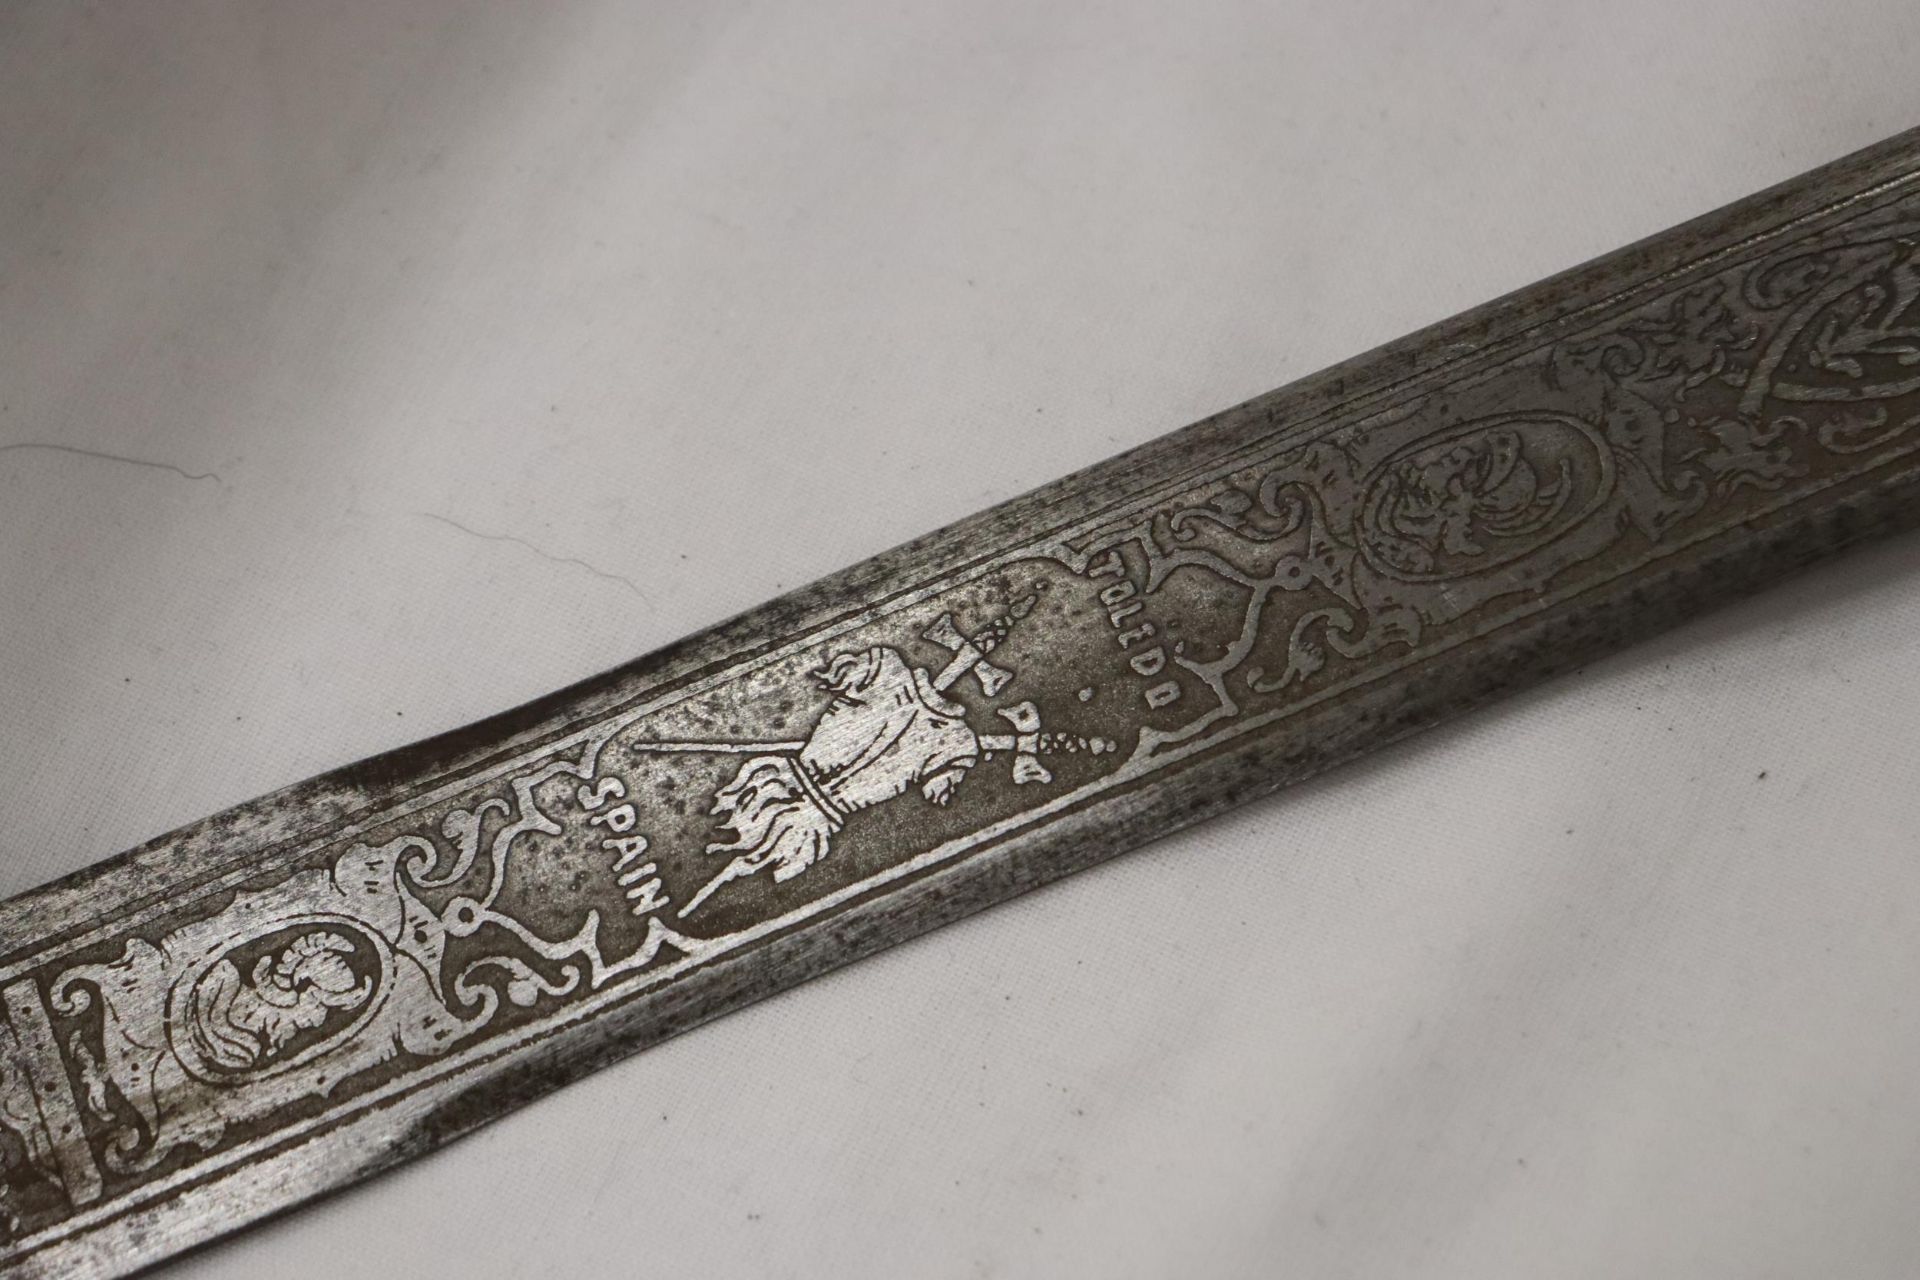 A VINTAGE SWORD WITH A BASKET HILT AND ENGRAVING TO THE TOP OF THE BLADE - Image 5 of 9